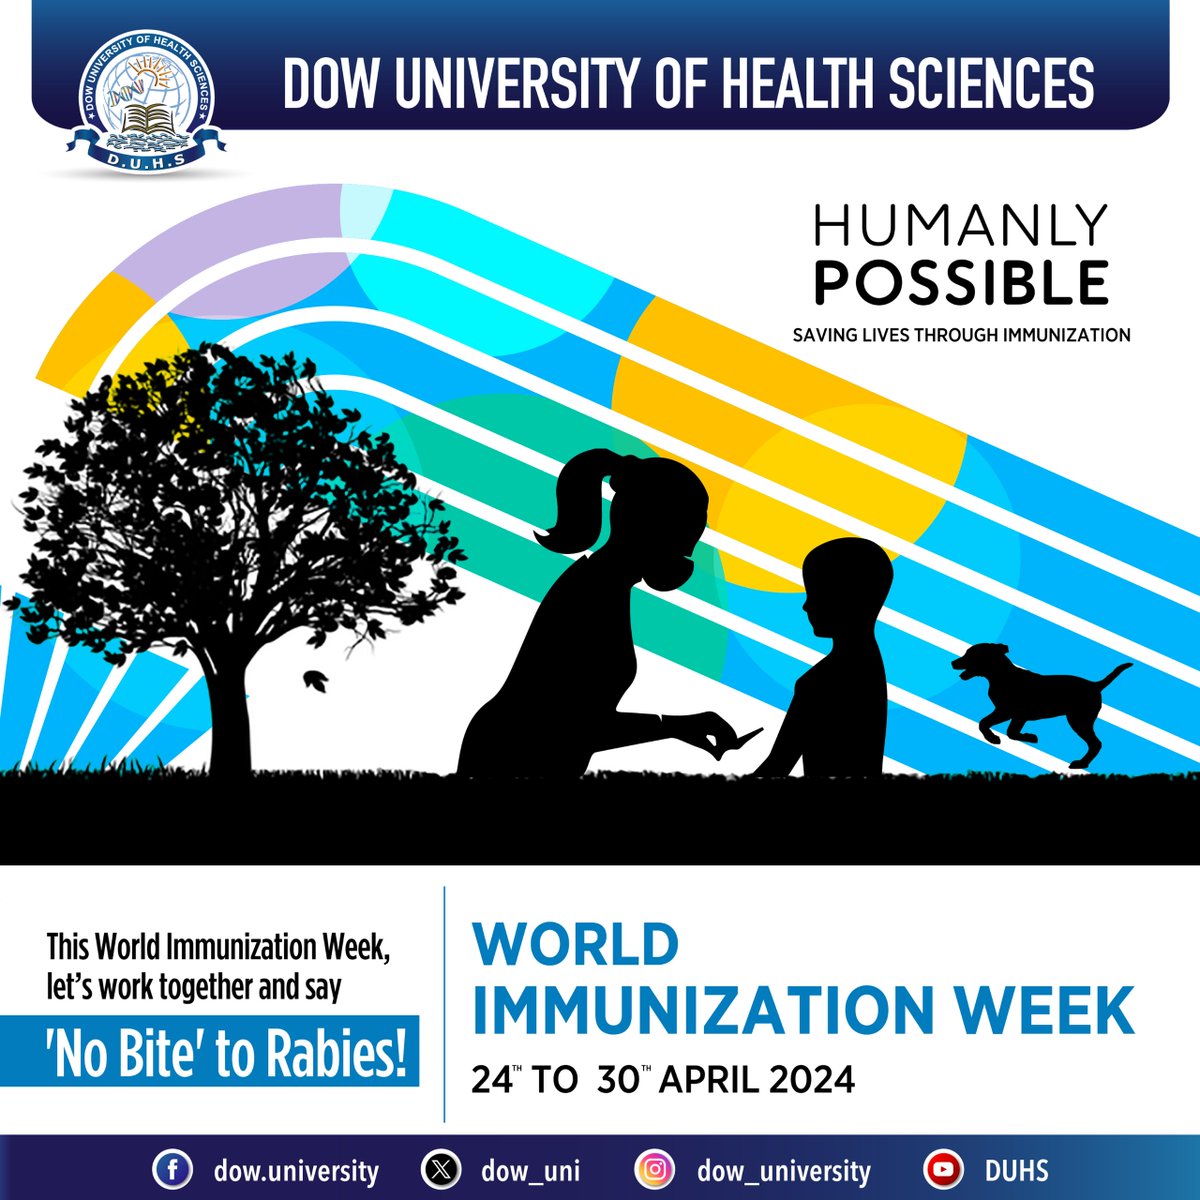 World Immunization Week - 24th to 30th April 2024 Together, through immunization, we can build a healthier future for everyone. This World Immunization Week, let’s work together and say 'no bite' to rabies! #DUHS #DowUniversity #WorldImmunizationWeek #HumanlyPossible